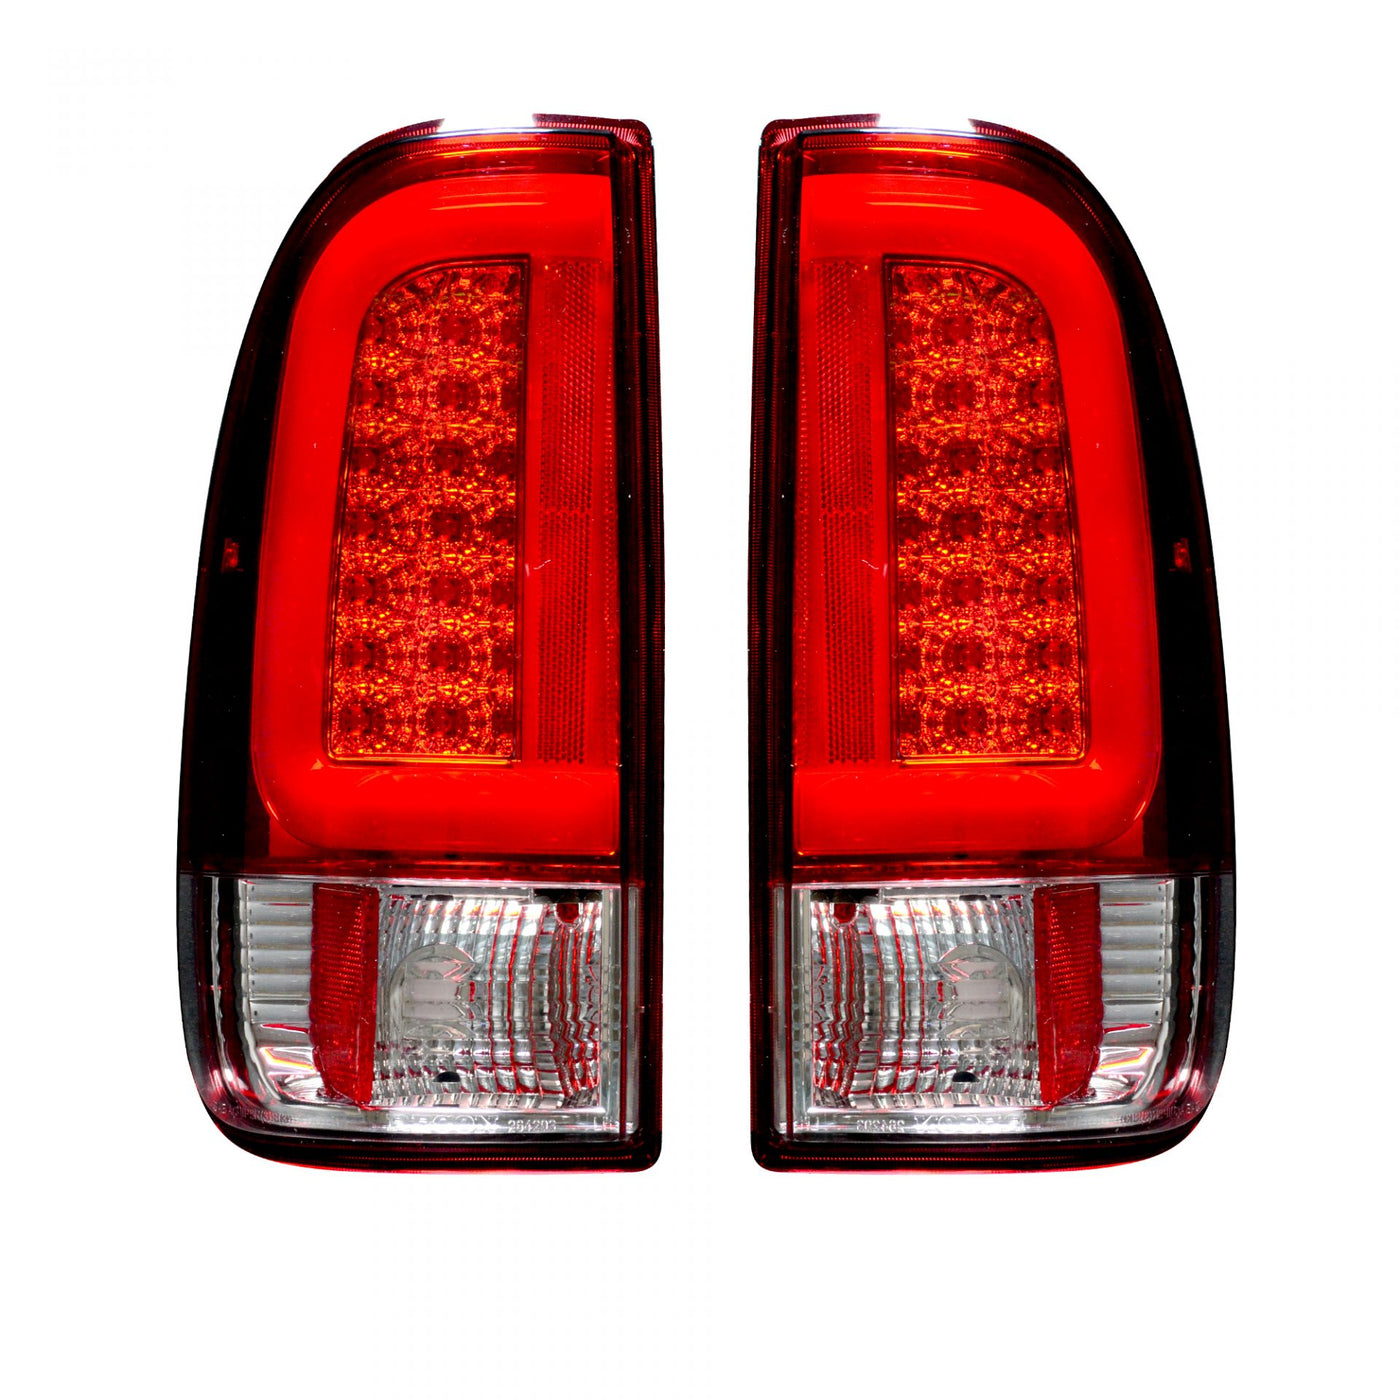 Ford Super Duty Tail Lights, Ford Tail Lights, Super Duty 99-007 Tail Lights, F150 97-03 Tail Lights, Red Tail Lights, Recon Tail Lights